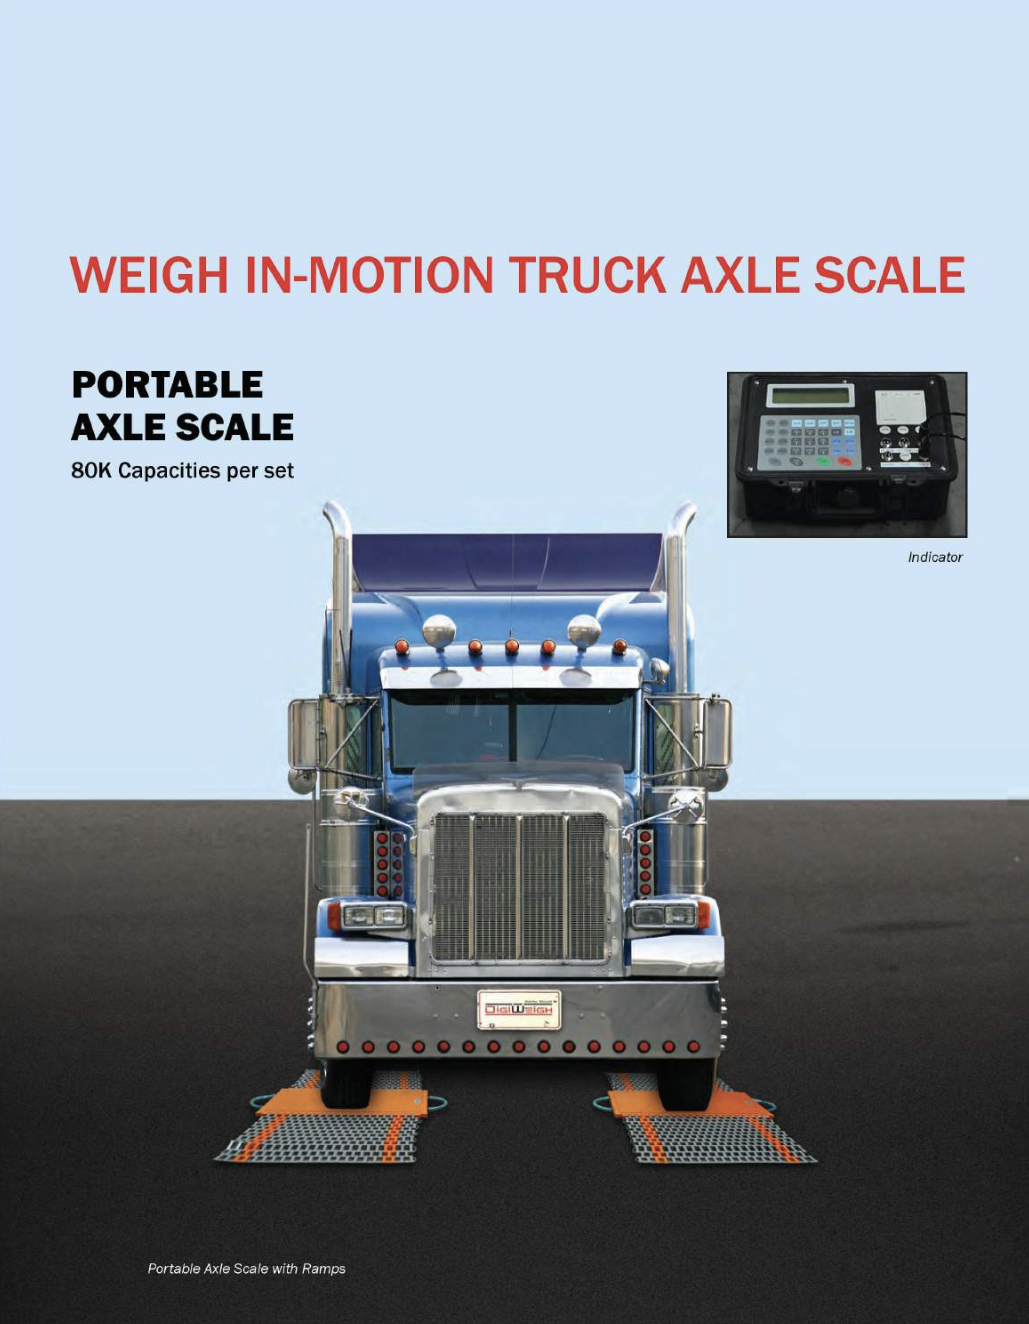 Portable Weight in Motion (PS-80KAXLE 